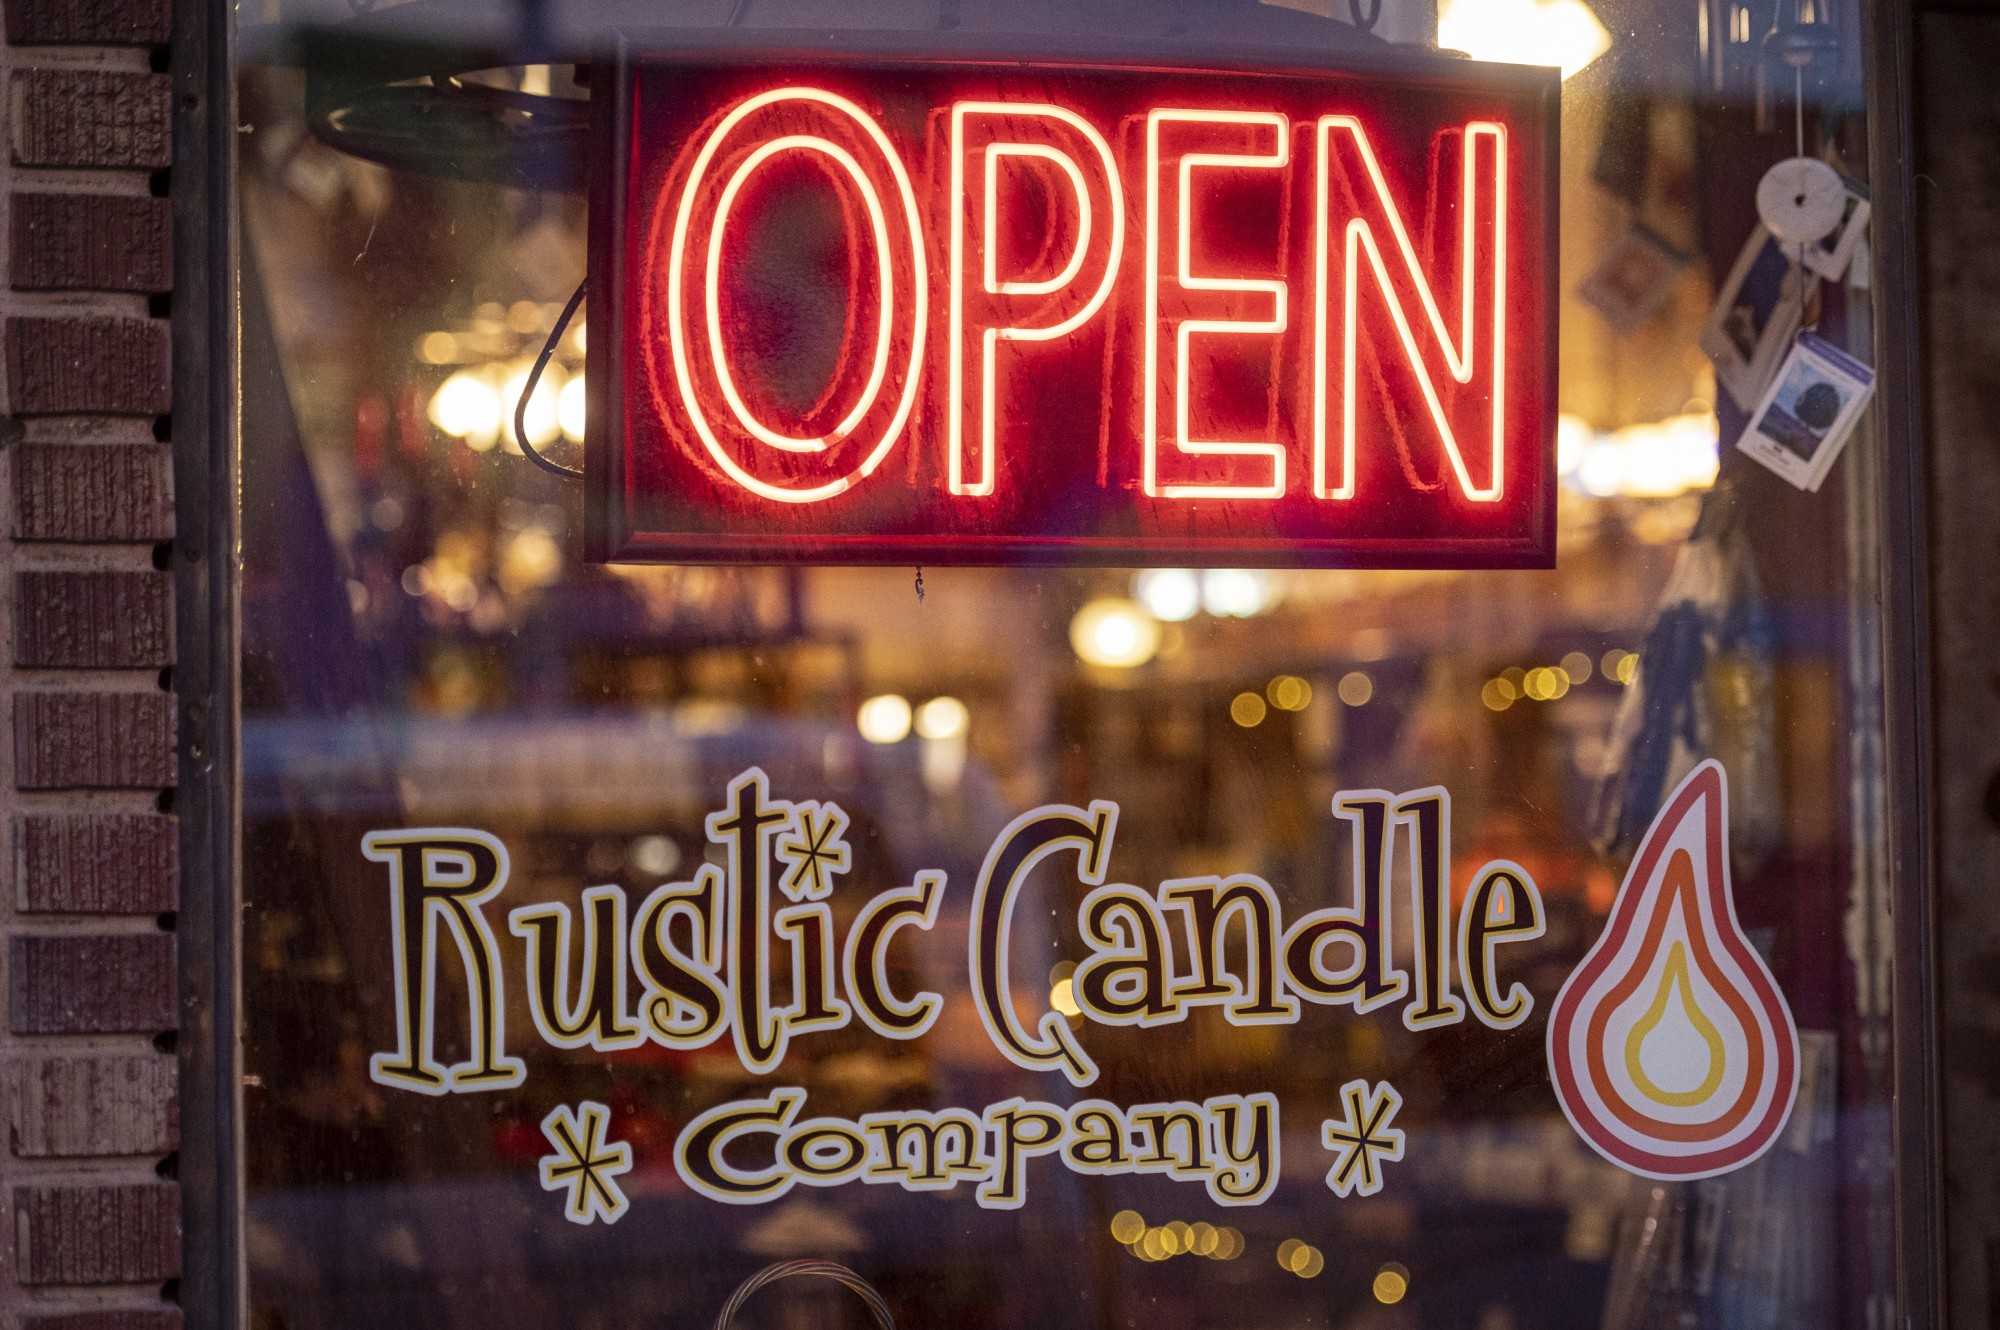 Rustic Candle Company, located on 324 N. Fourth Ave., sells handmade candles and a variety of related items.